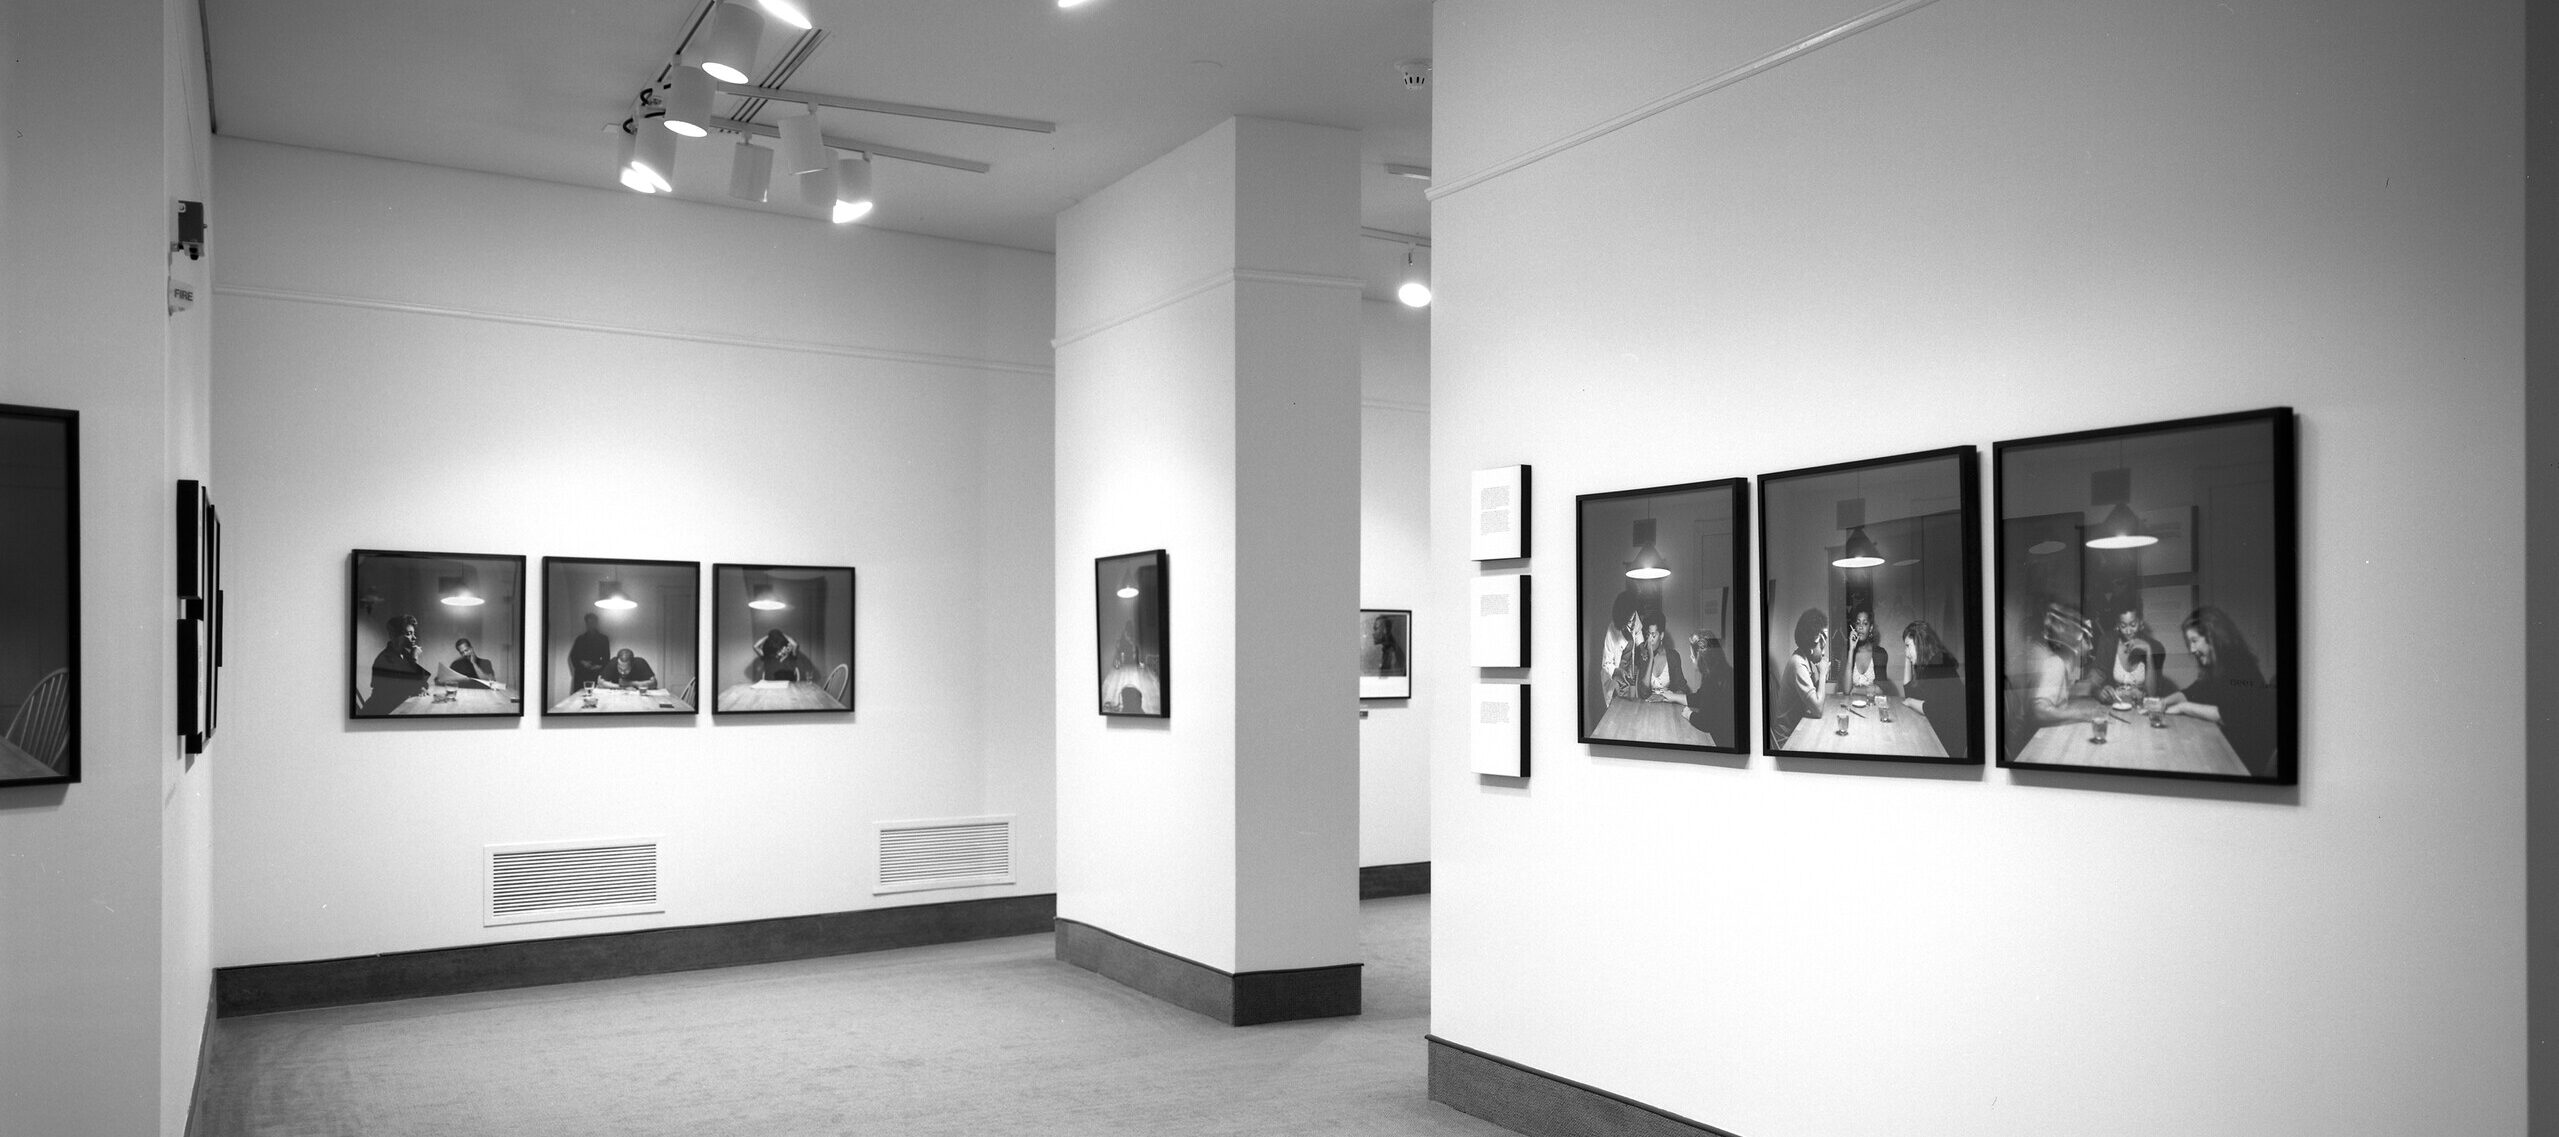 A view of a gallery space. A sequence of photographs of a woman with a dark skin tone sitting around a kitchen table is hanging on the walls. On each photograph, different people join her at the table.